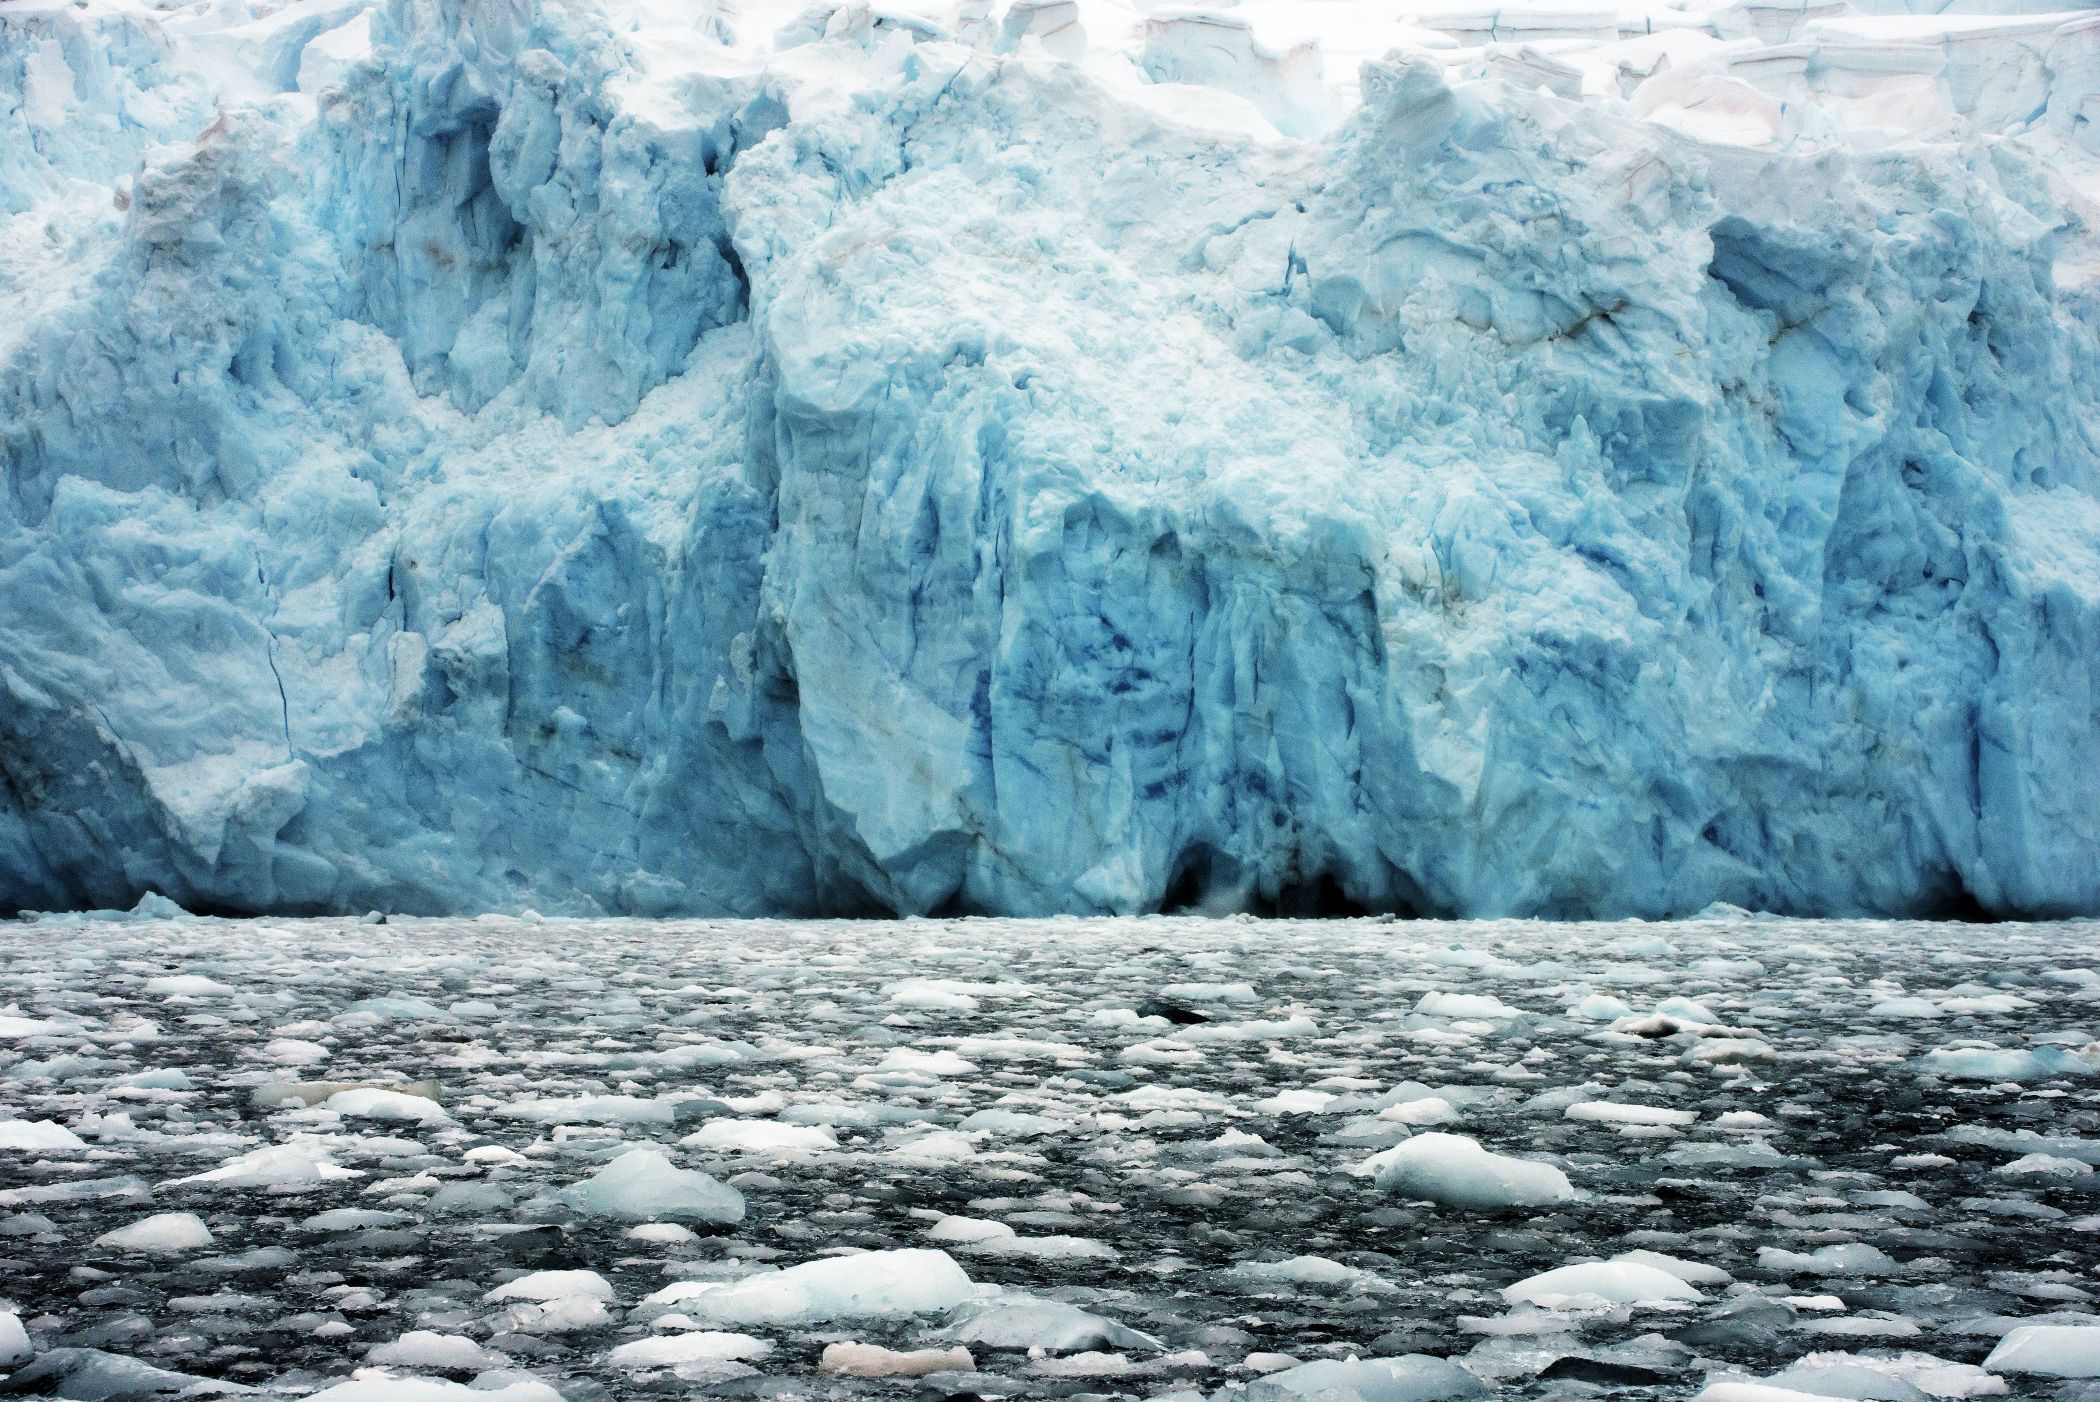 A Photographic Gallery - Landscapes: Icebergs and Pack-ice in the ...